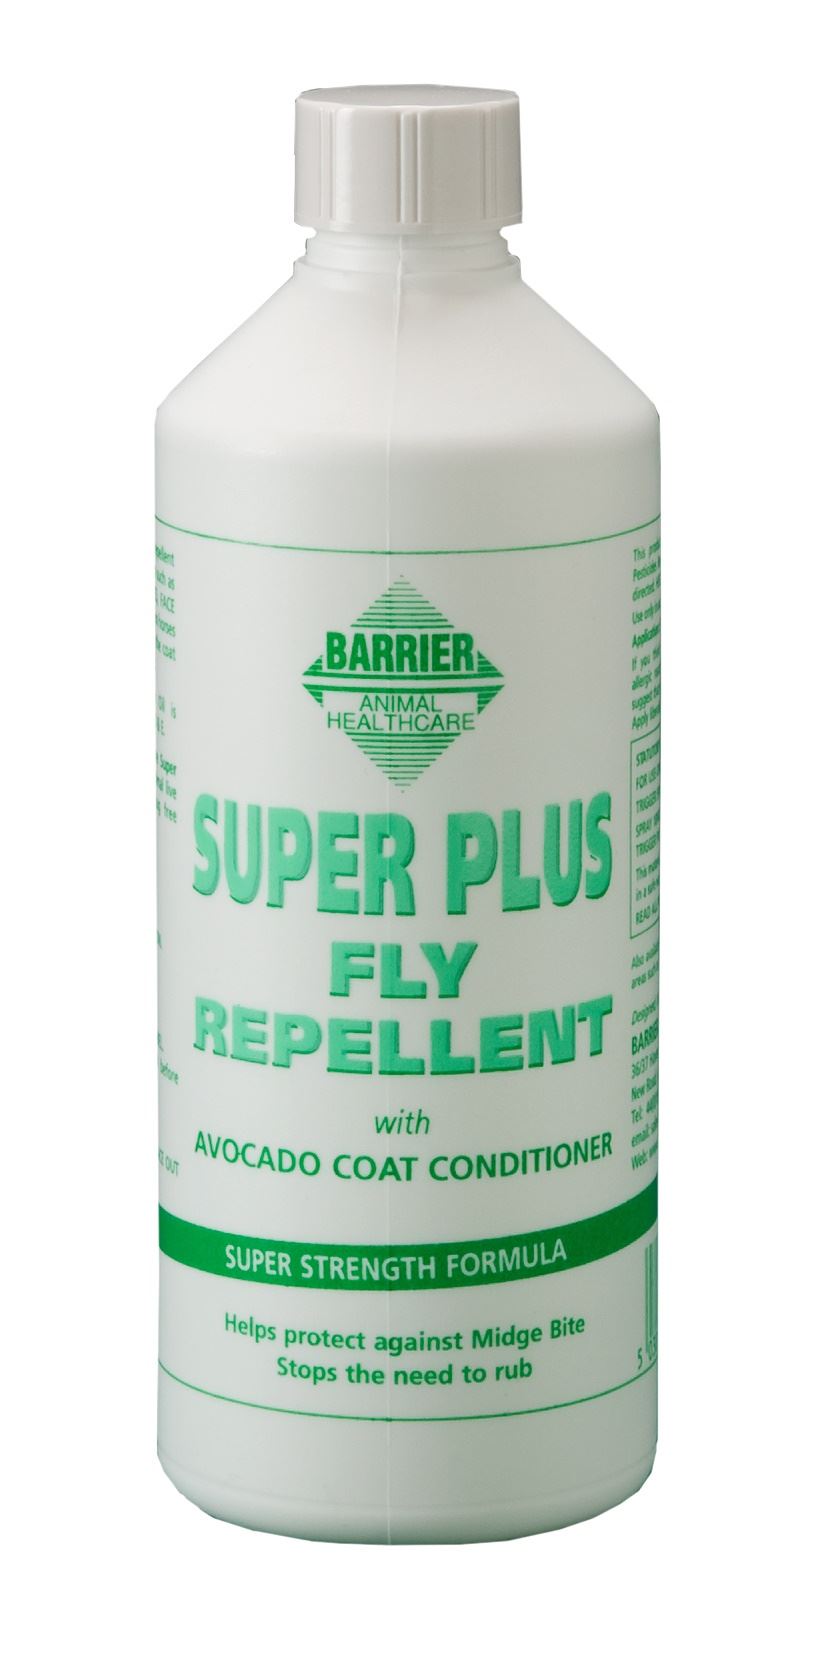 Barrier Super Plus Fly Repellent - Just Horse Riders